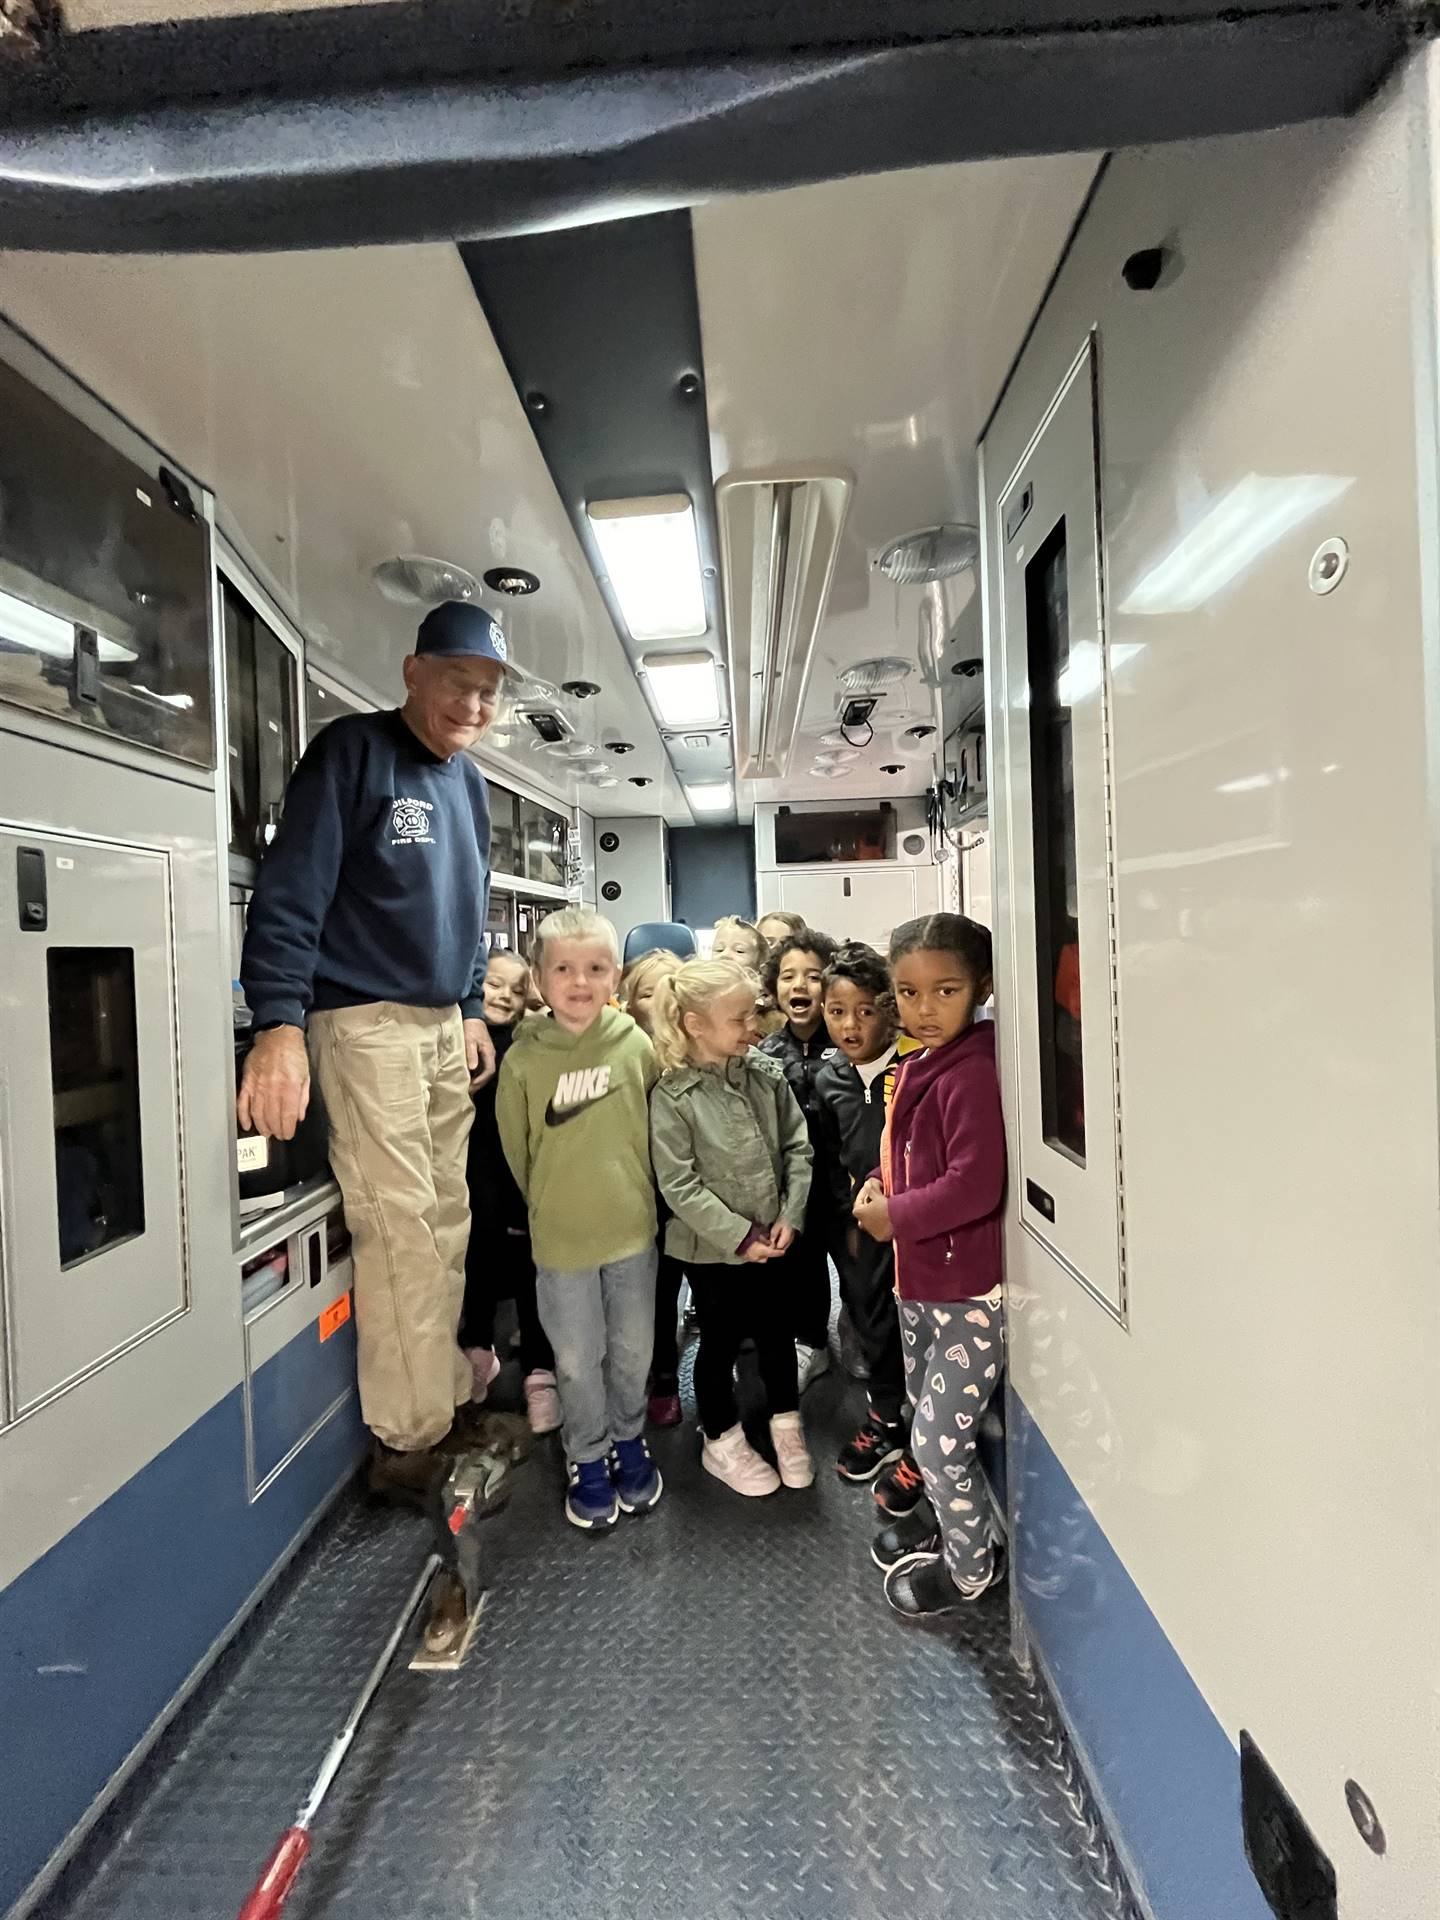 firefighter shows the inside of an ambulance to students.